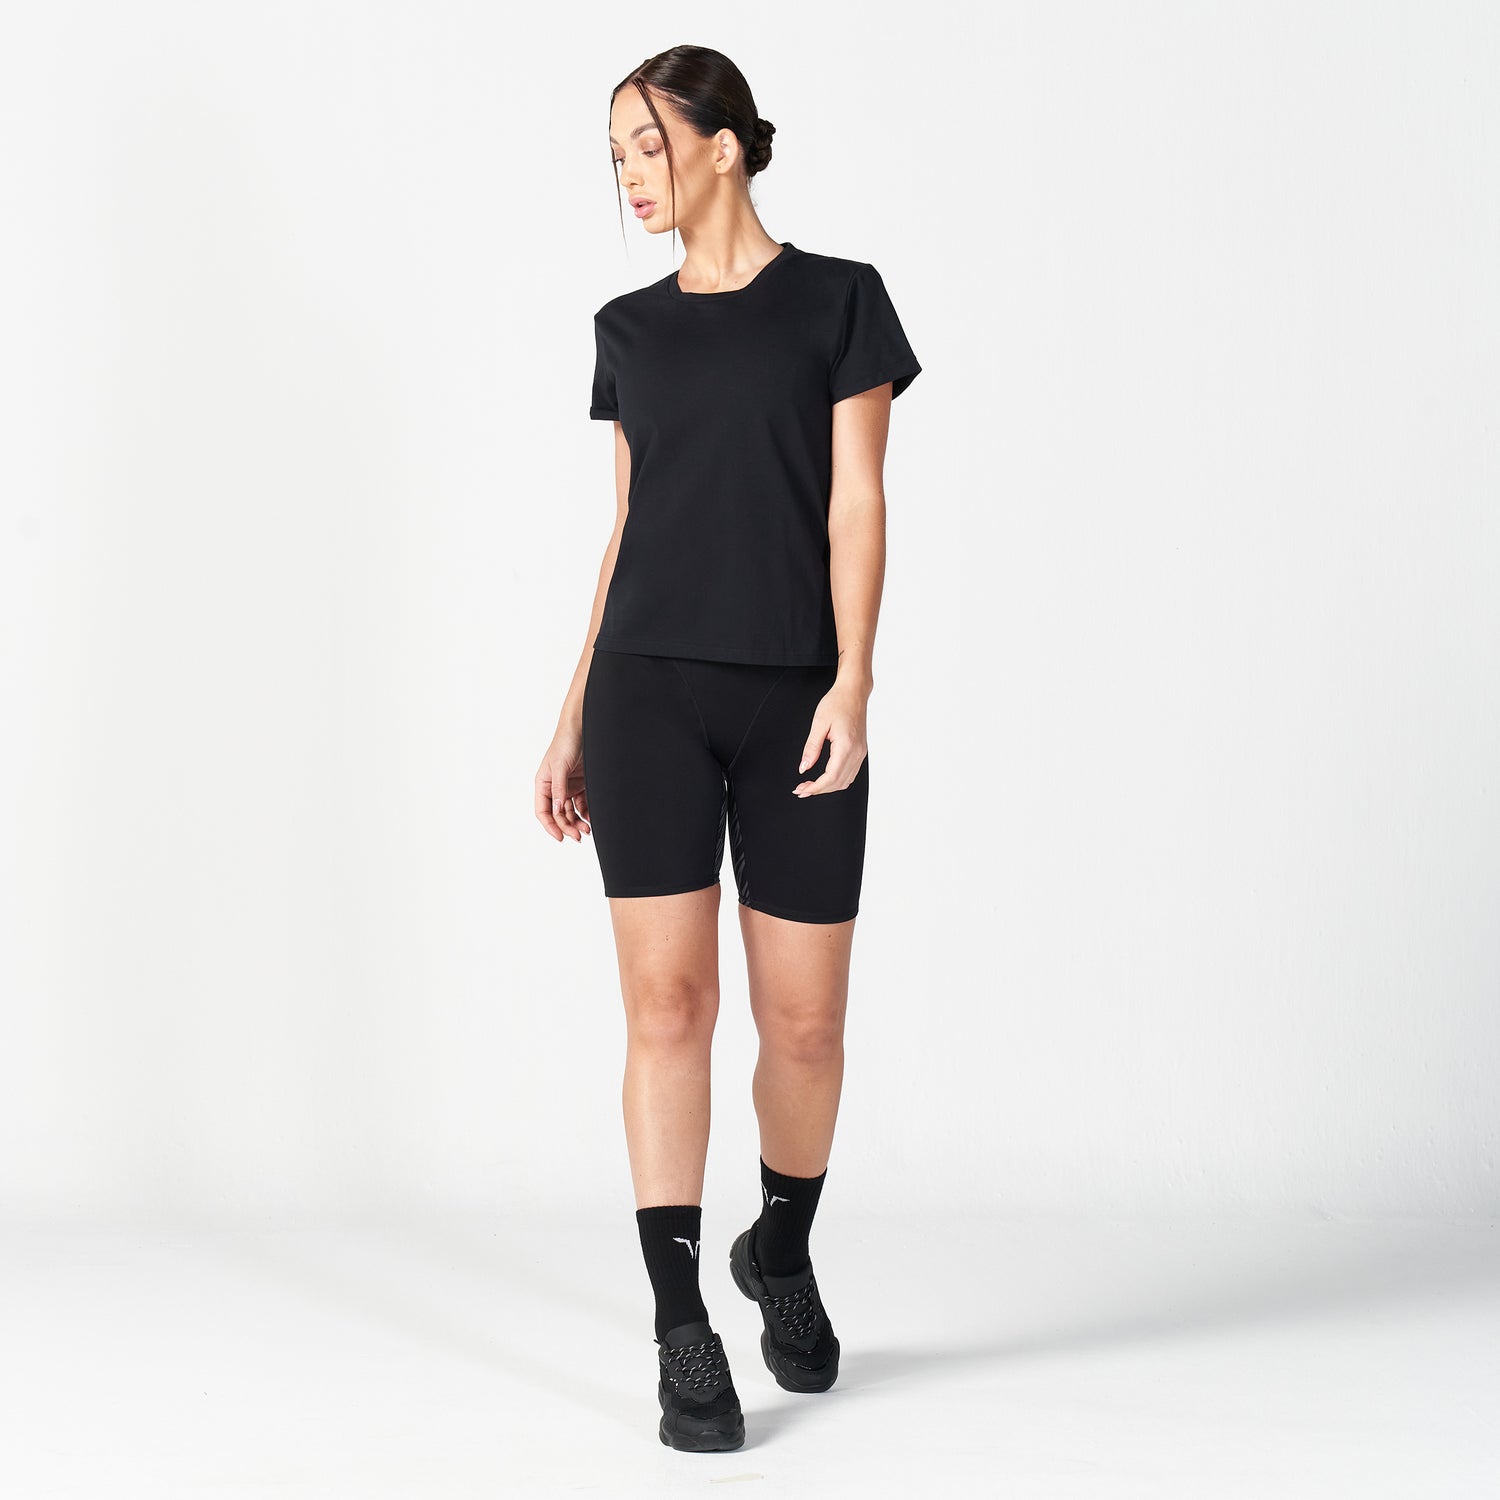 squatwolf-workout-clothes-core-wild-panel-relaxed-tee-black-gym-t-shirts-for-women